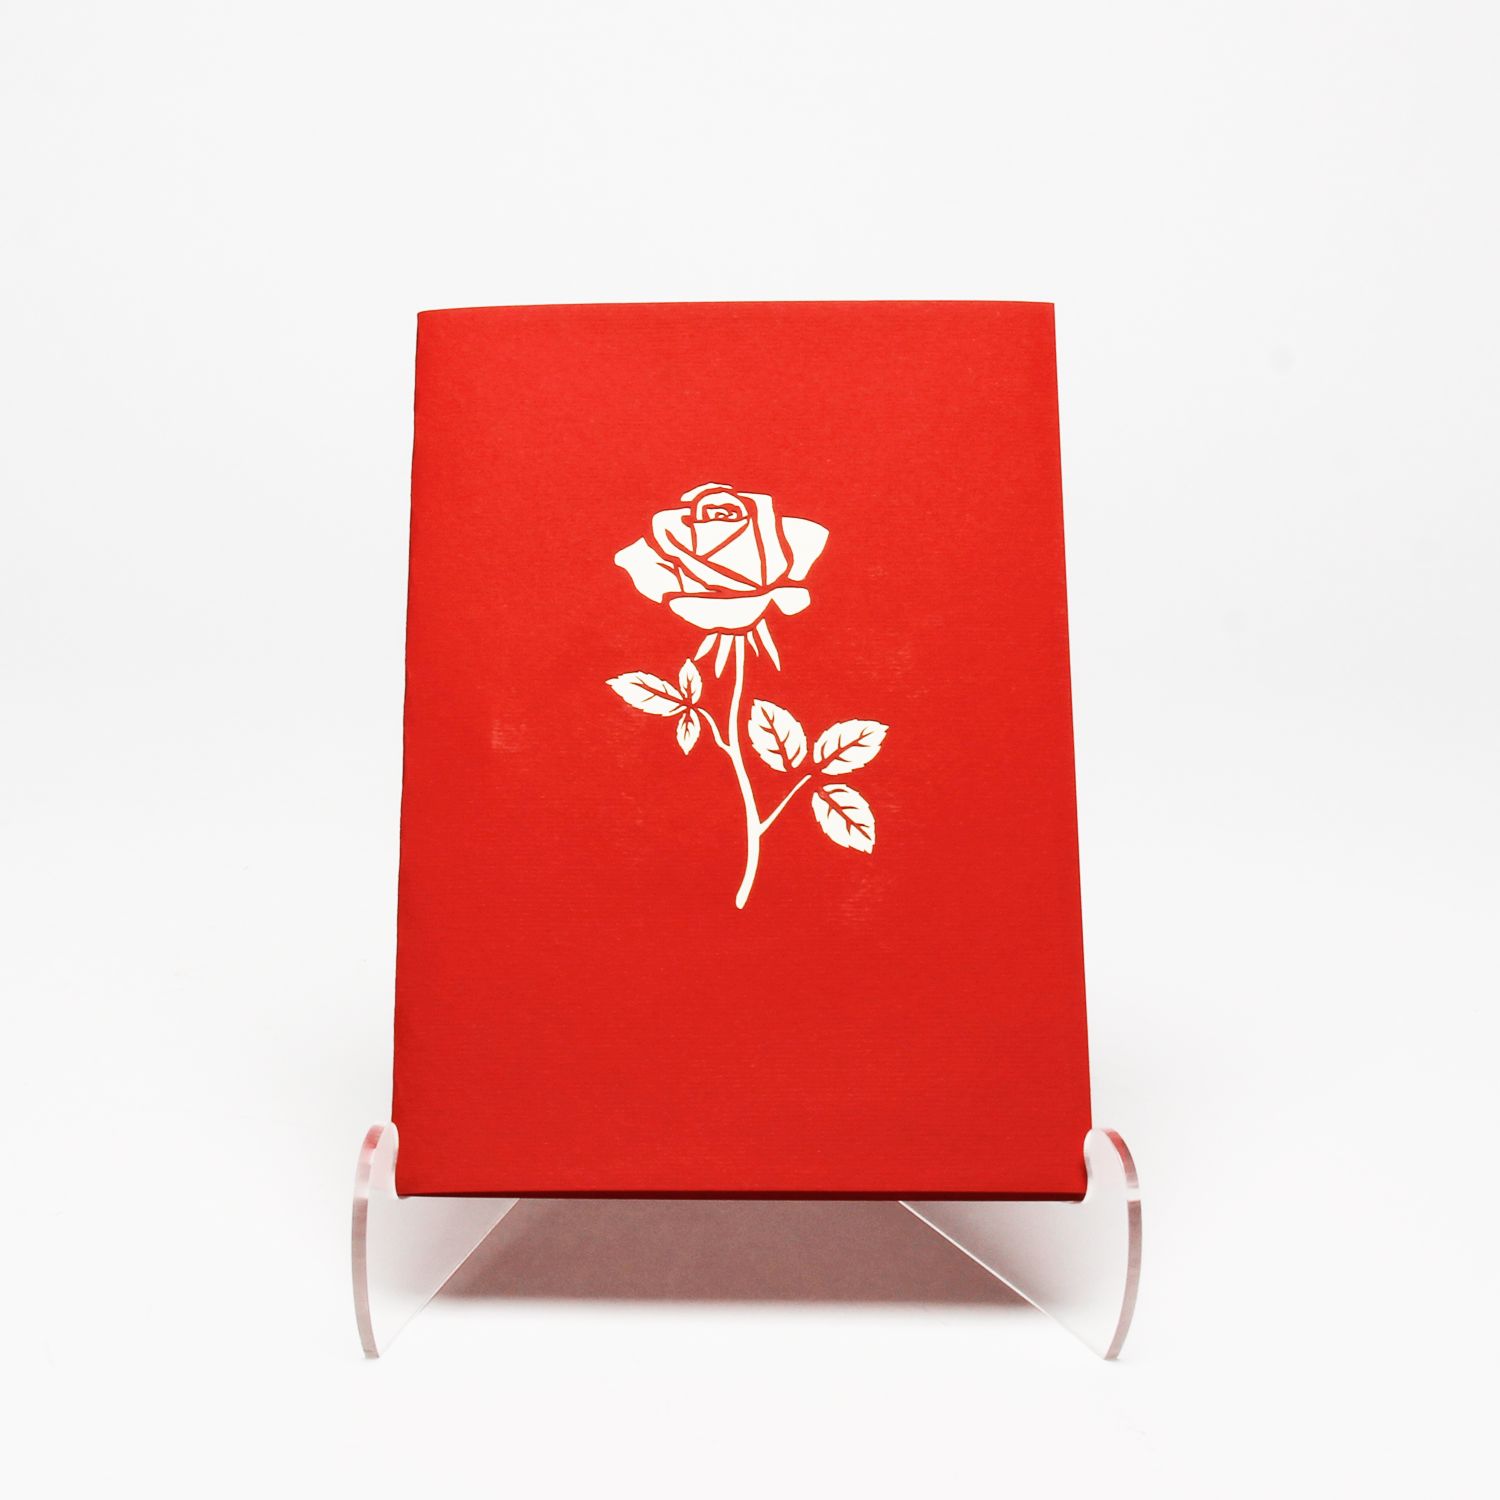 Roses without Thorns: Roses Product Image 2 of 3